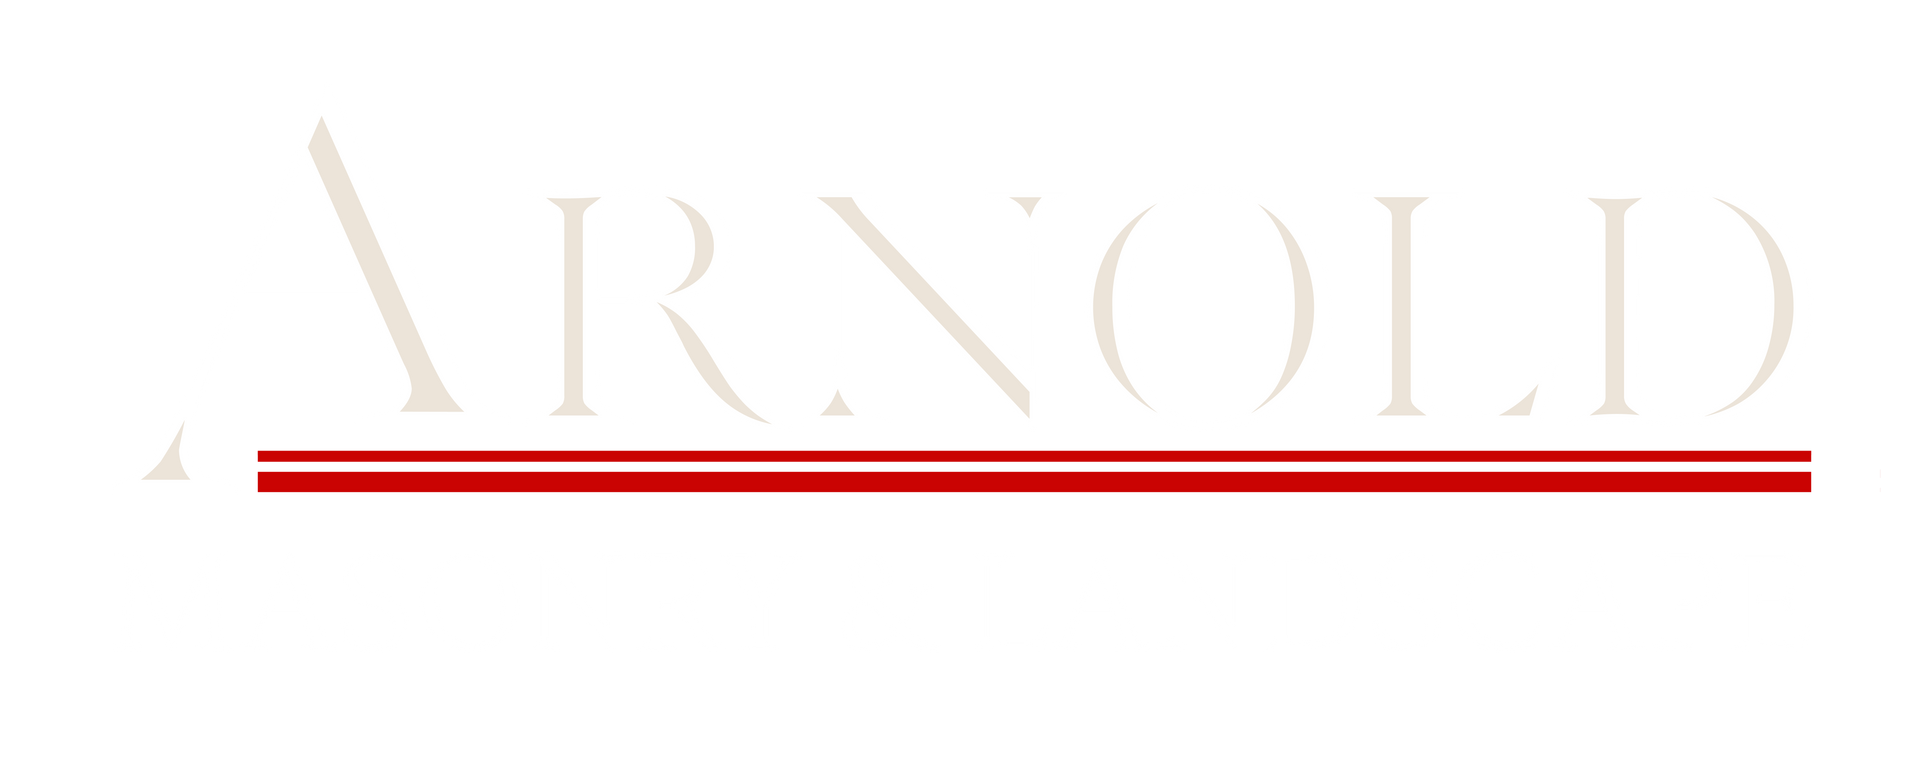 The logo for arnold is white with a red line.